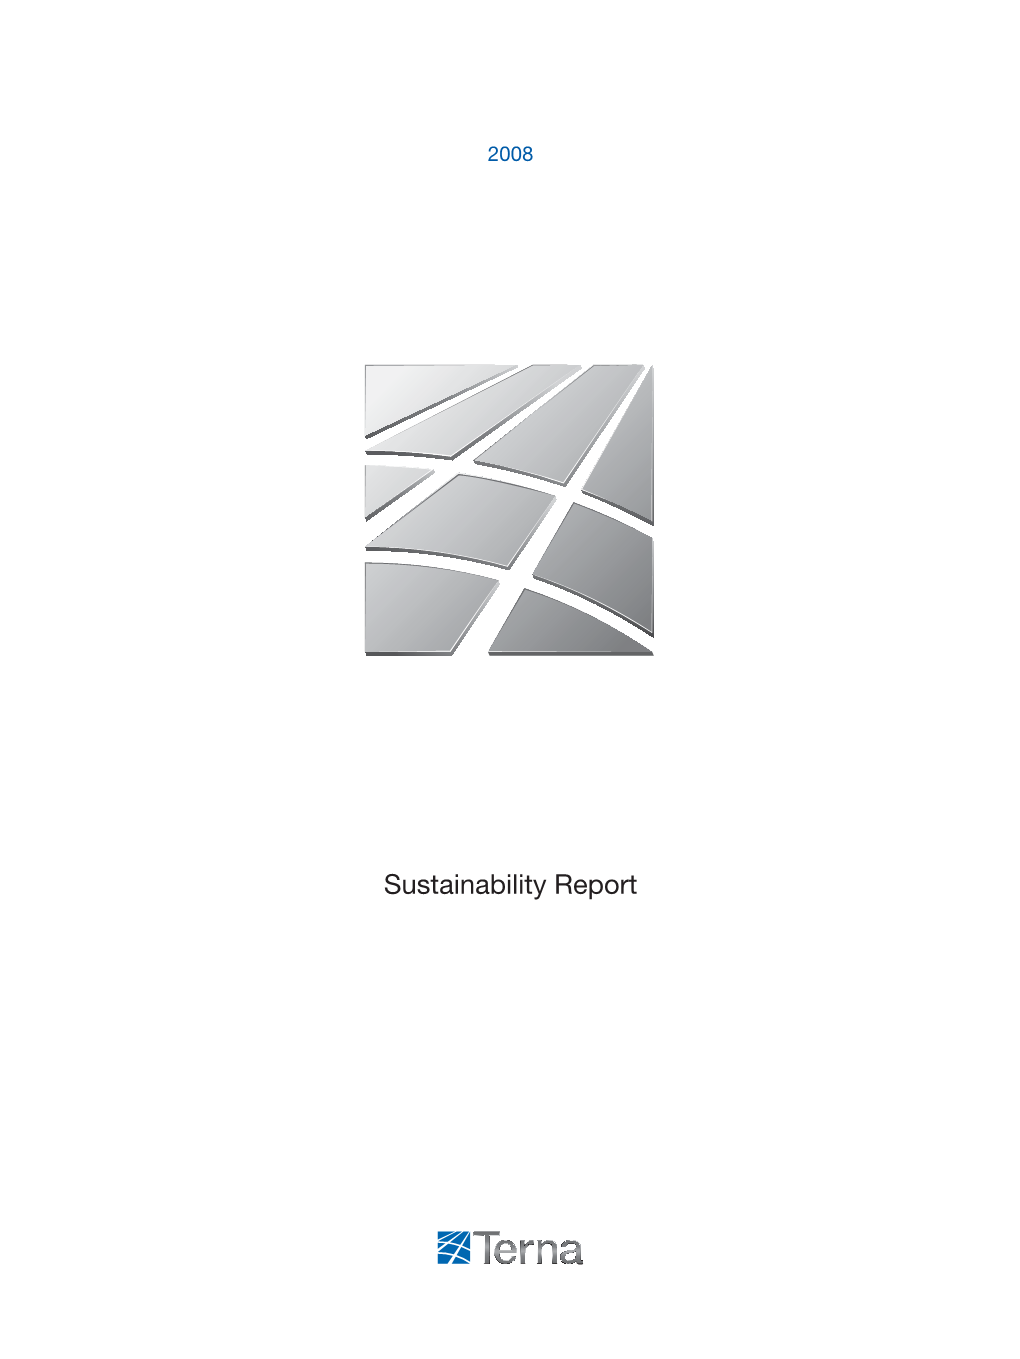 Sustainability Report Terna Manages Electricity Transmission in Italy and Guarantees Its Safety, Quality and Low Costs Over Time